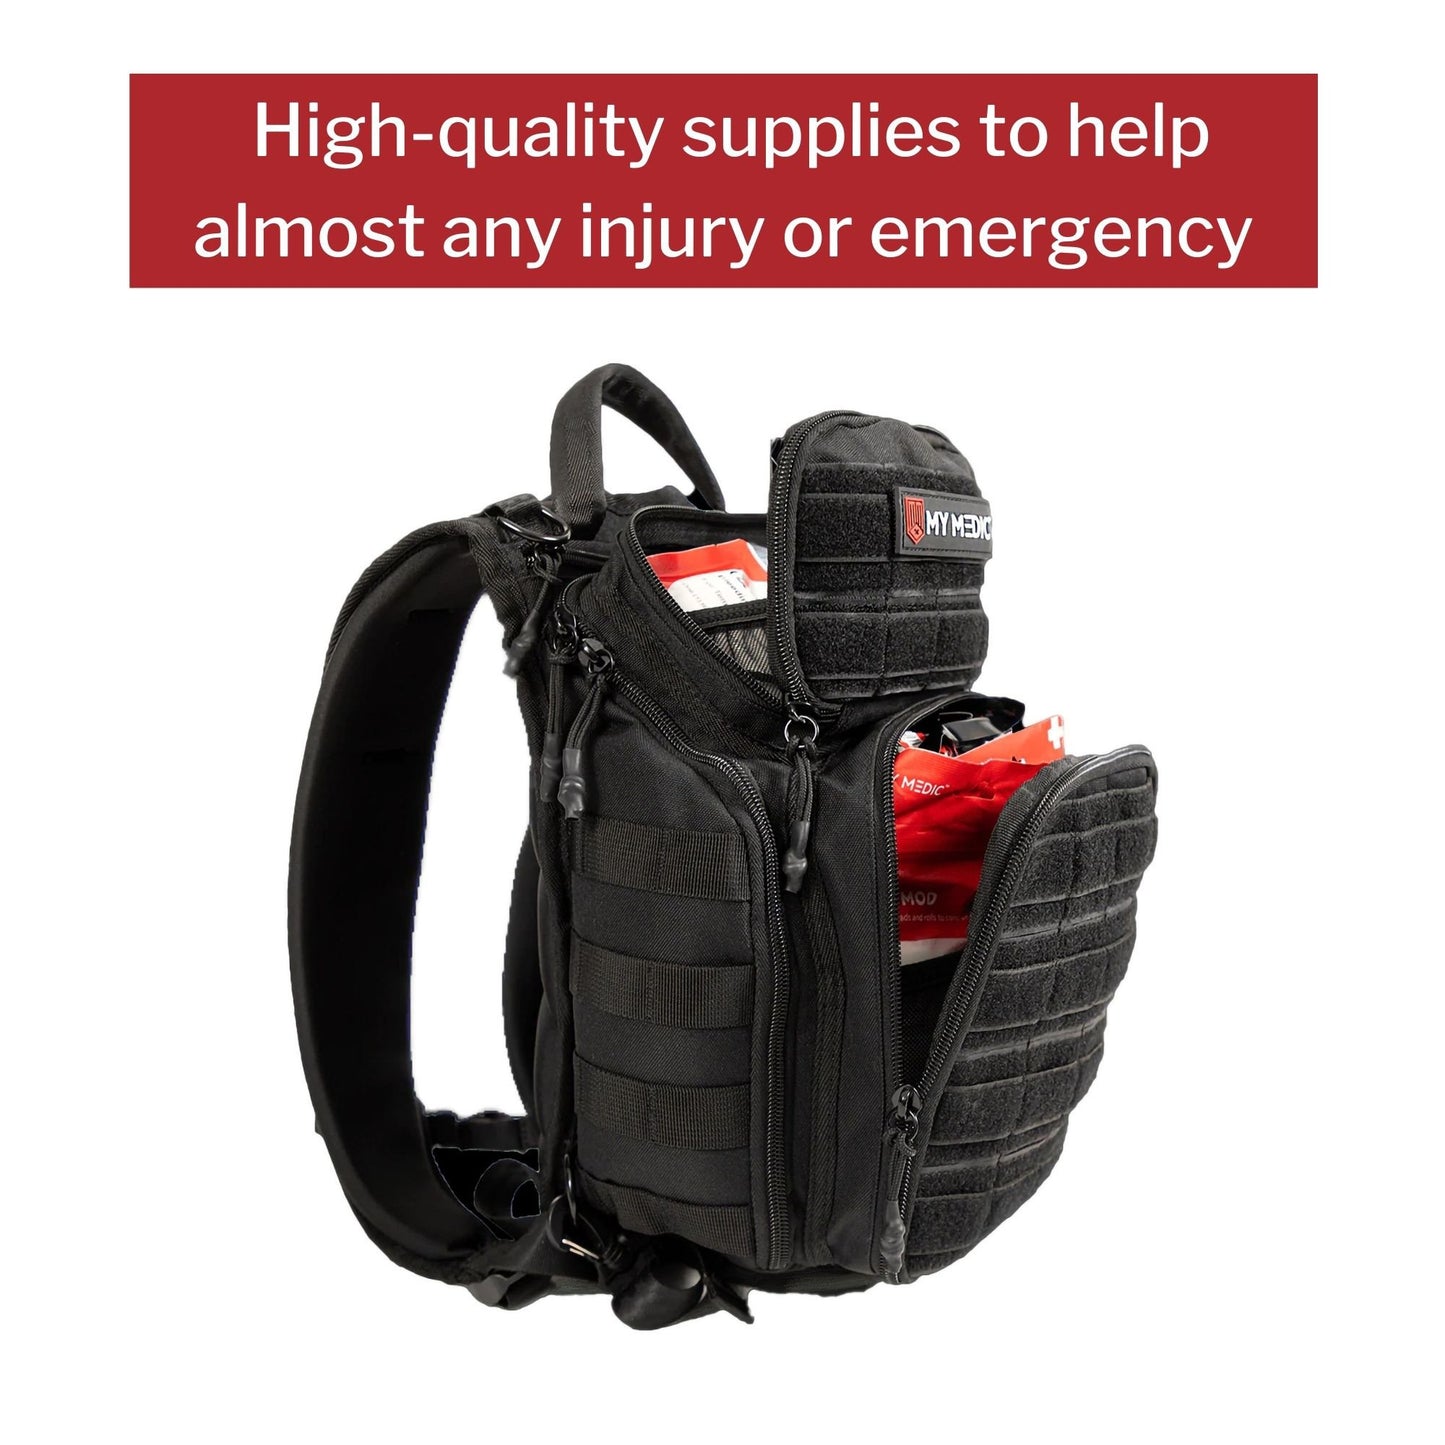 My Medic RECON First Aid Kit Backpack with Emergency Medical Supplies - Black